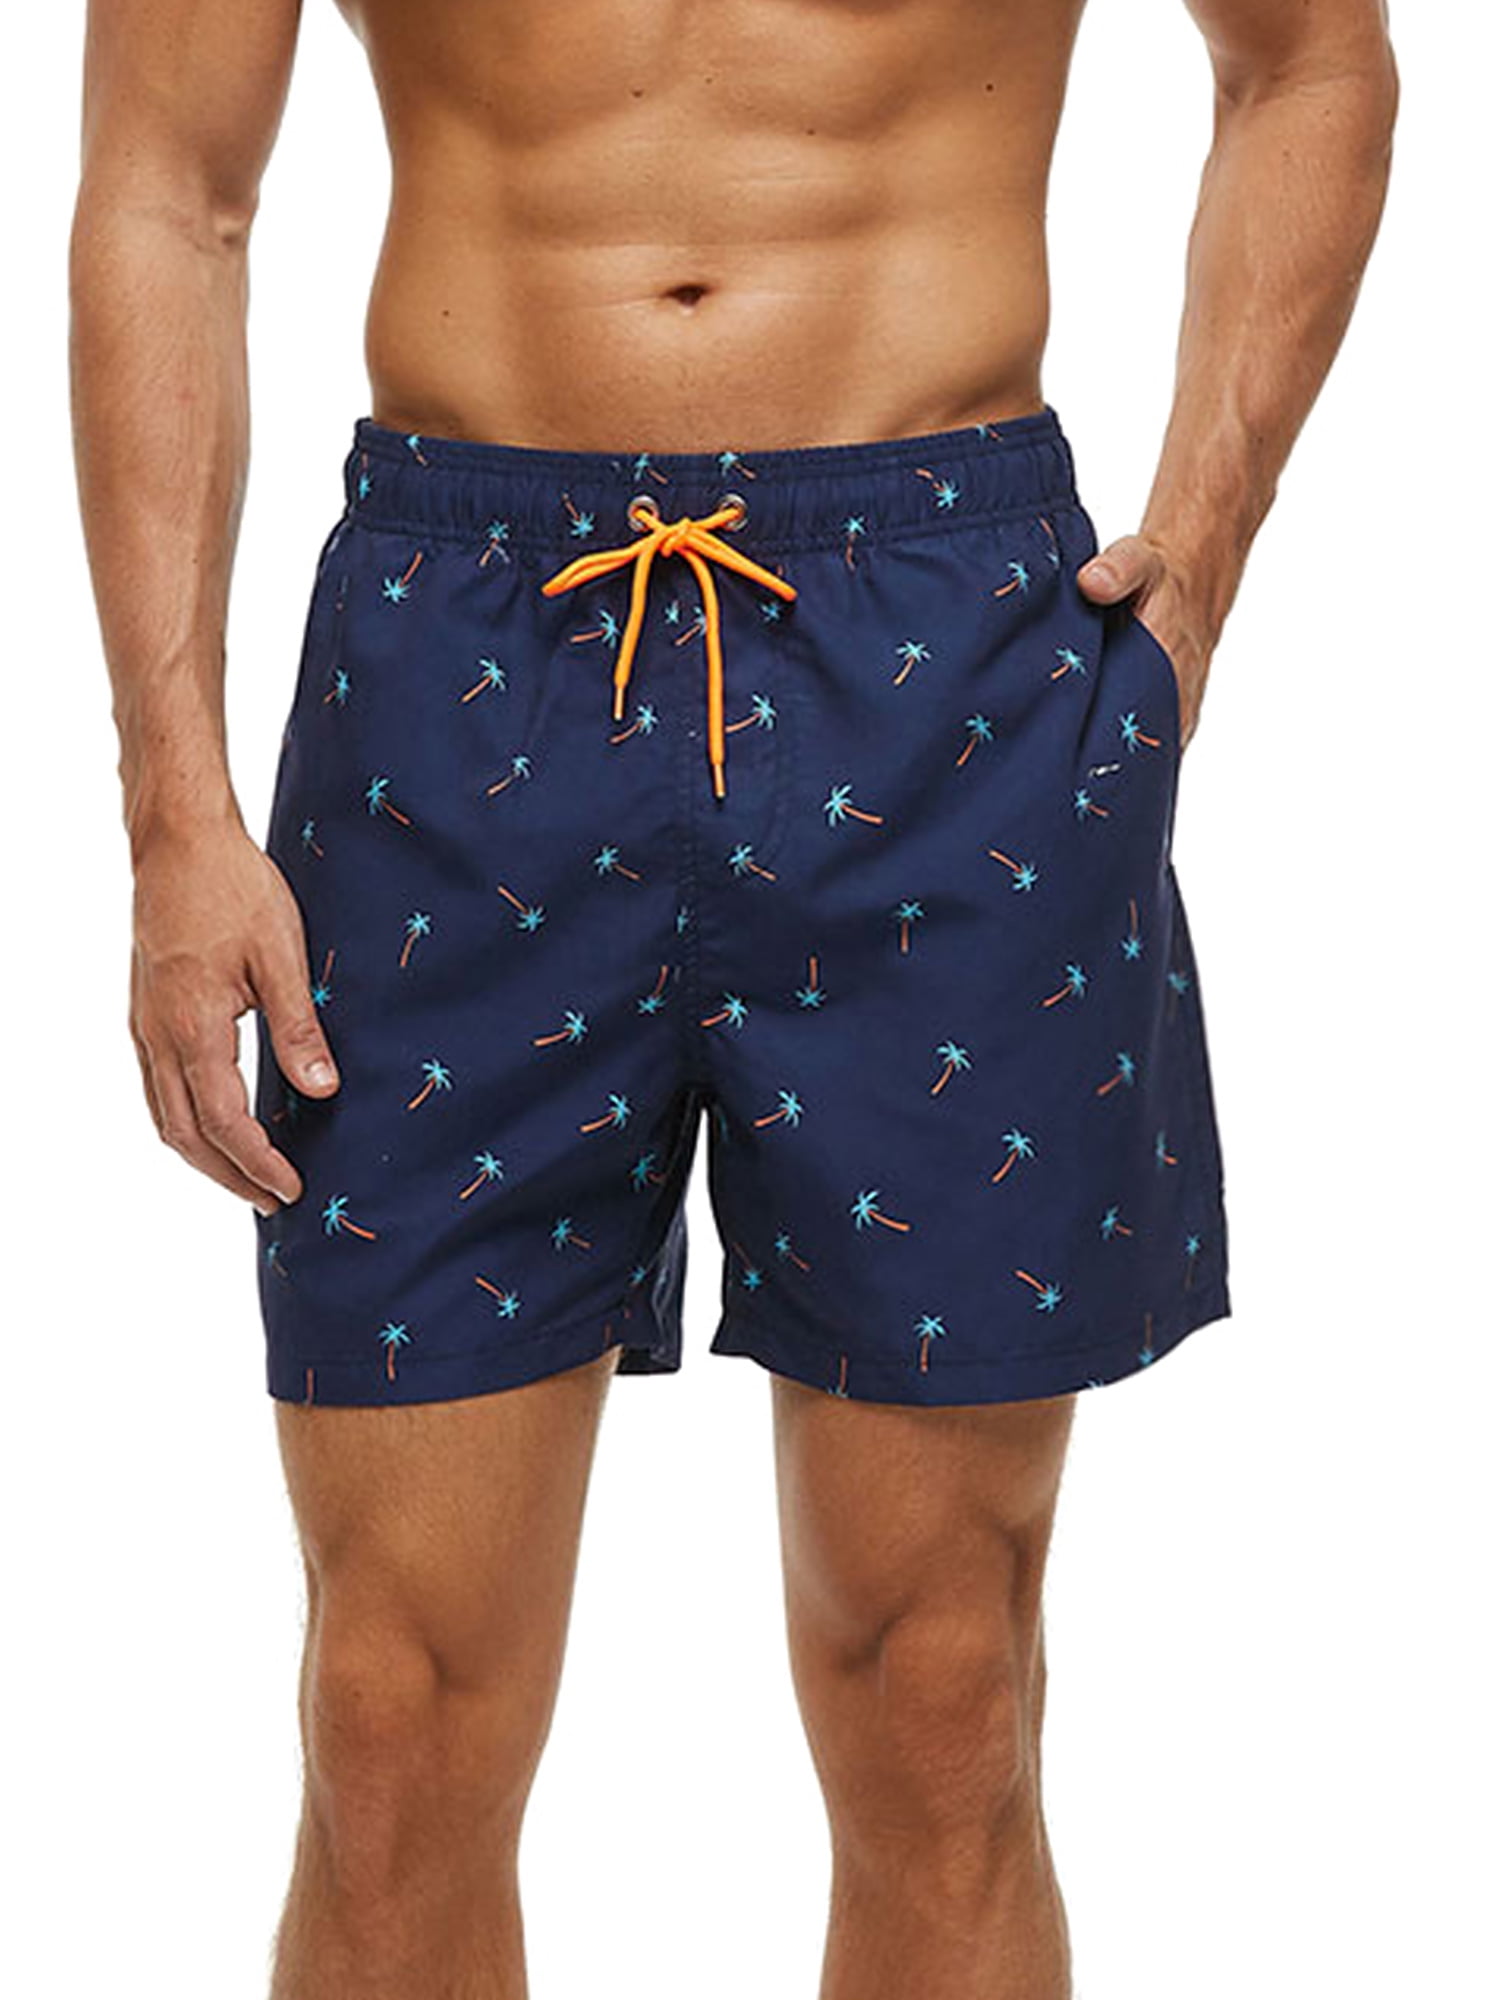 Anchors Pattern On Blue White Stripped Boy Swim Trunks Summer Quick Dry Beach Shorts with Pocket 